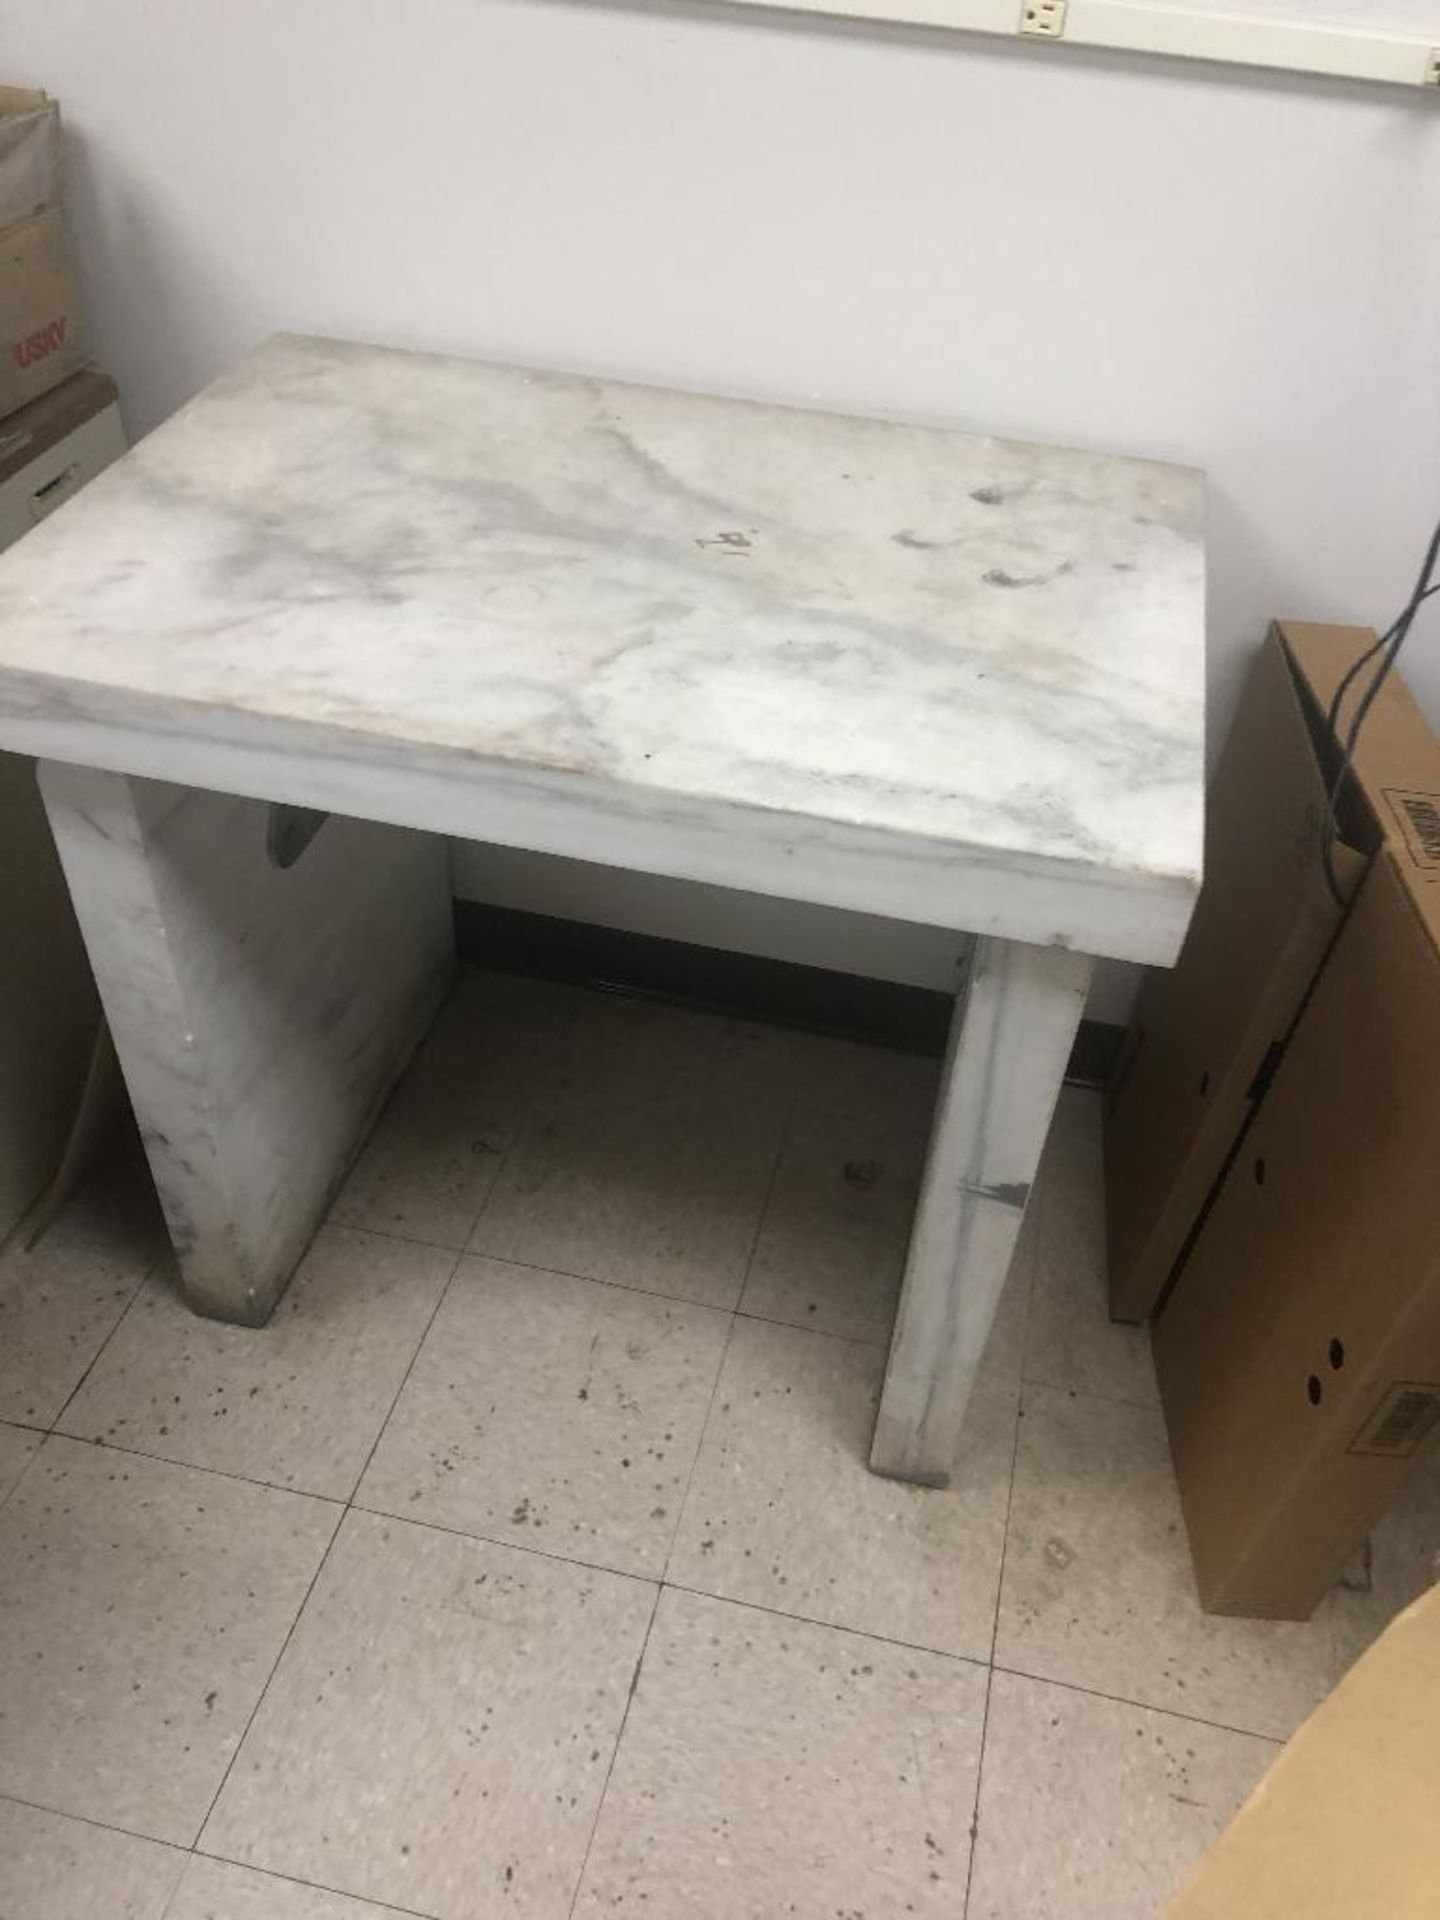 1 Marble Lab Table Dimensions 24" x 35" x 32" - Image 4 of 4